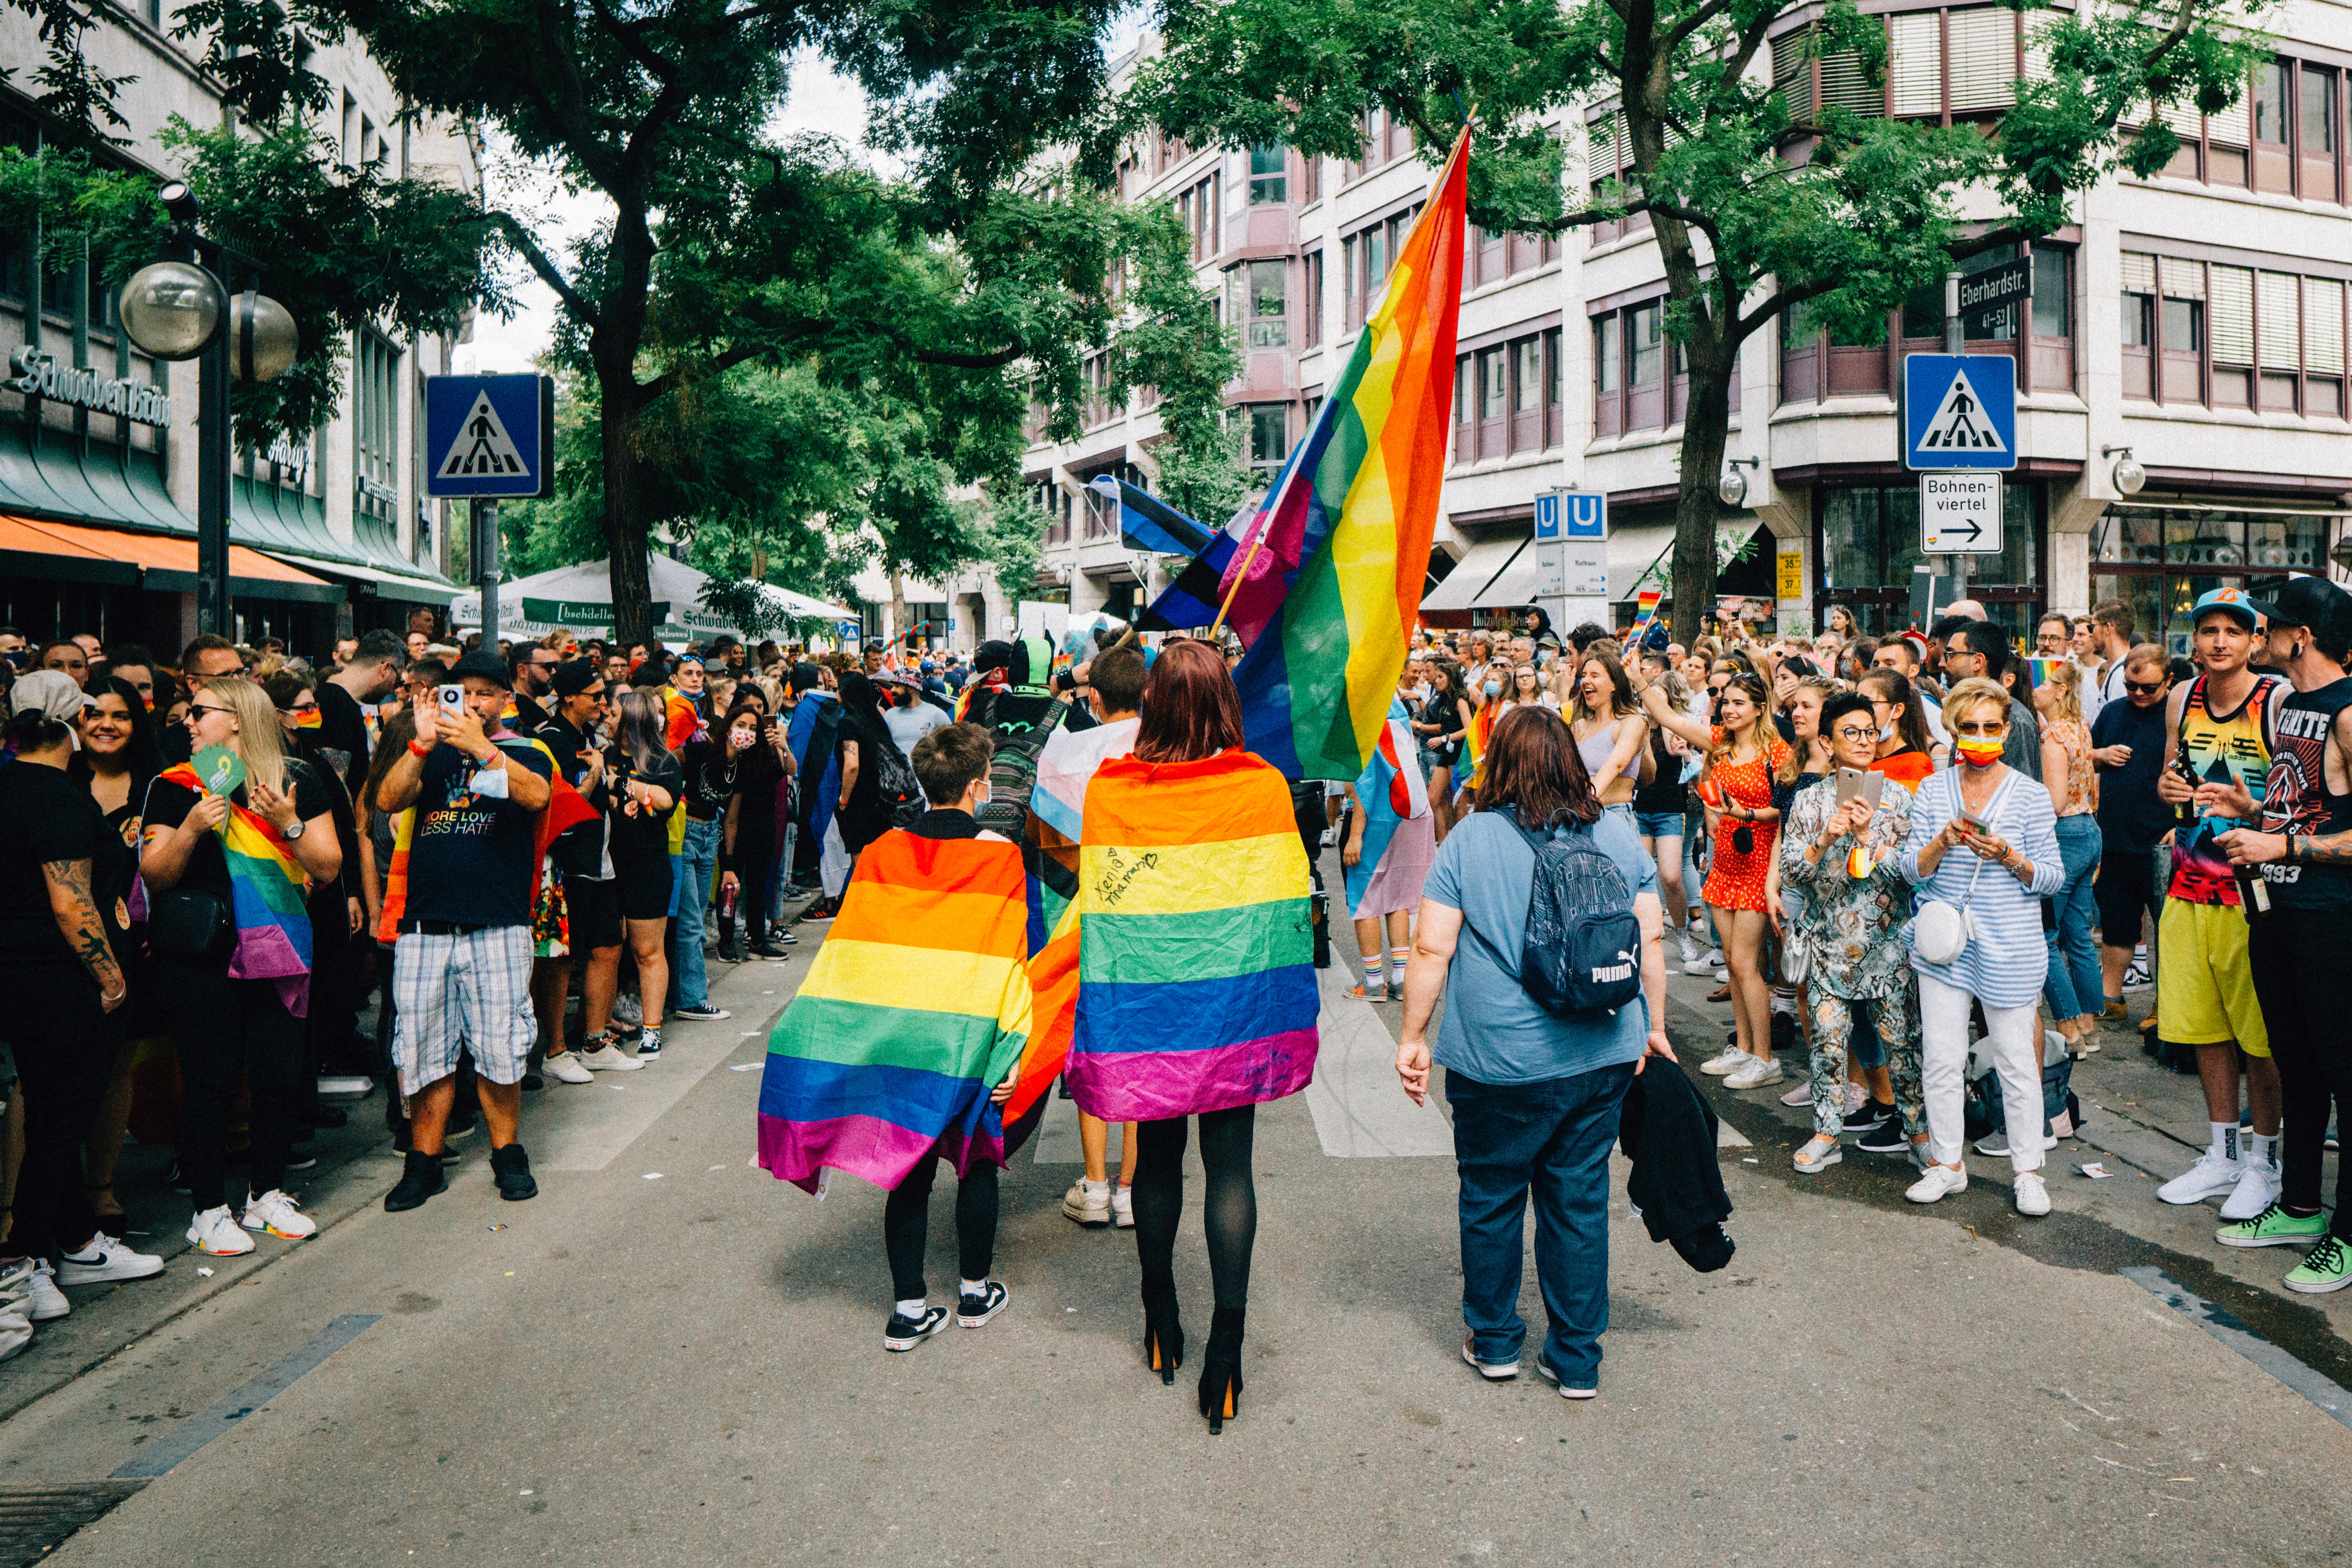 Rear view of pride flag and parade